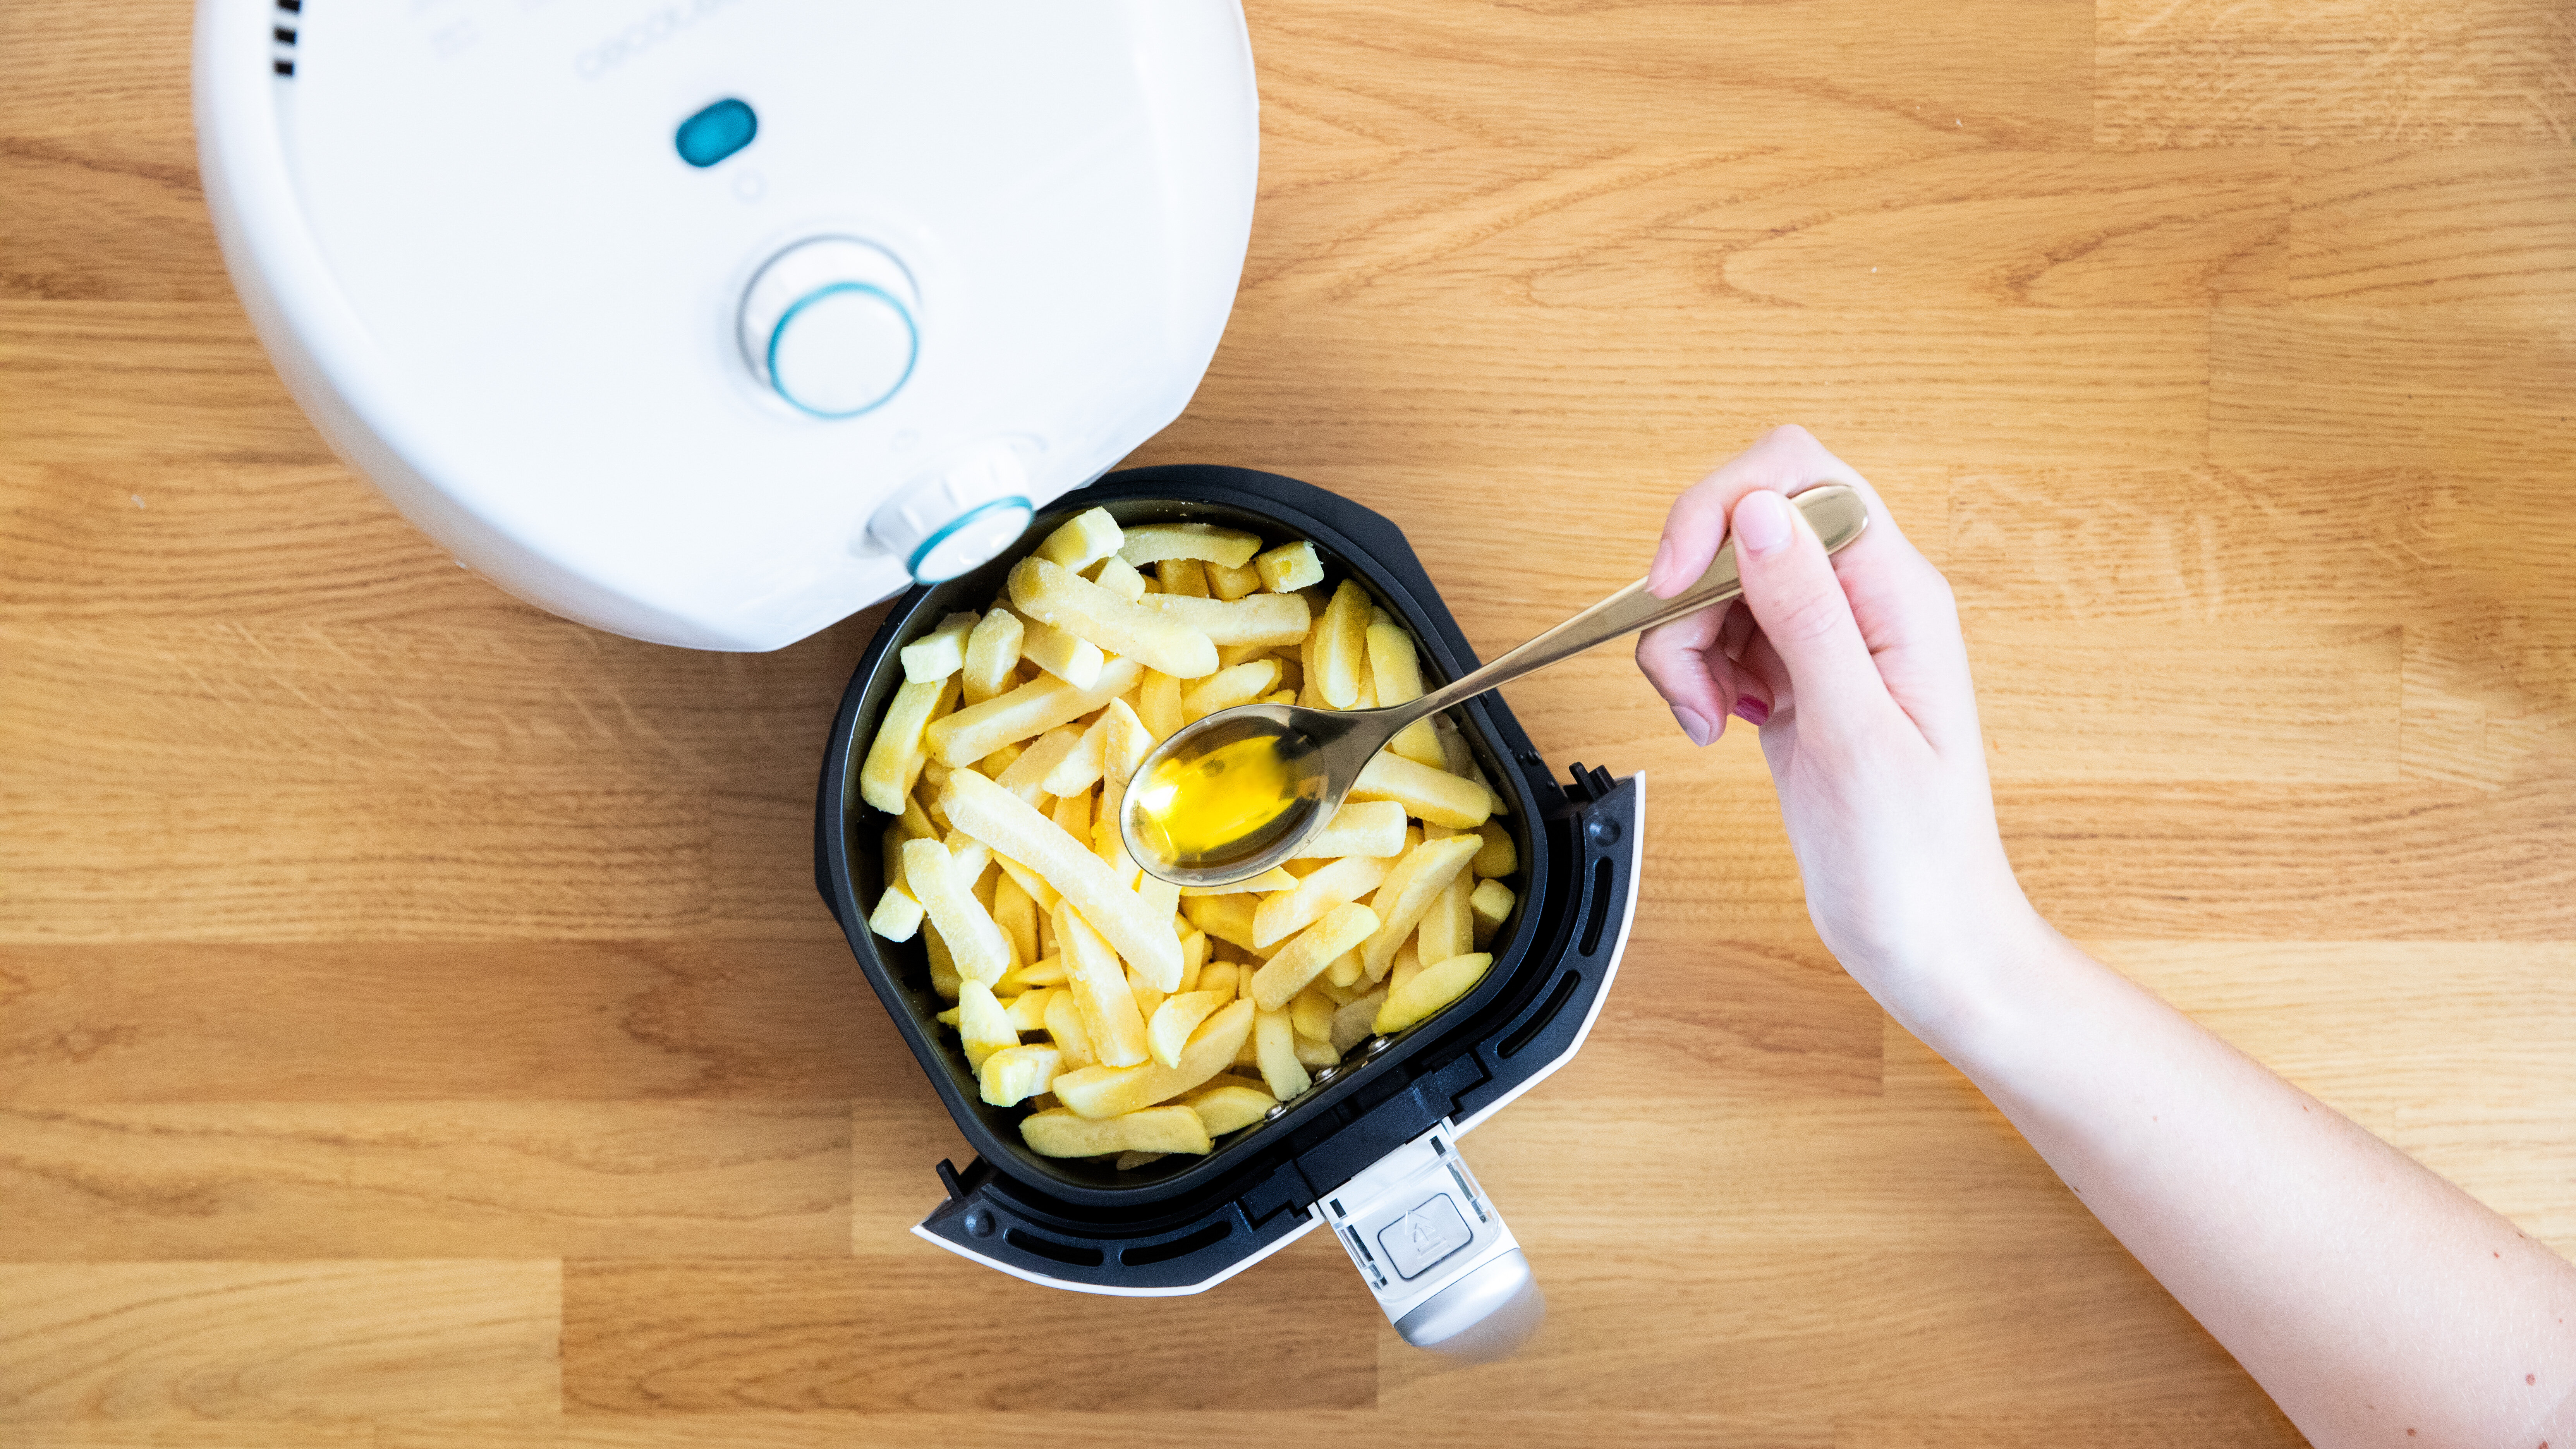 Cecotec air fryer Cecofry Compact Rapid